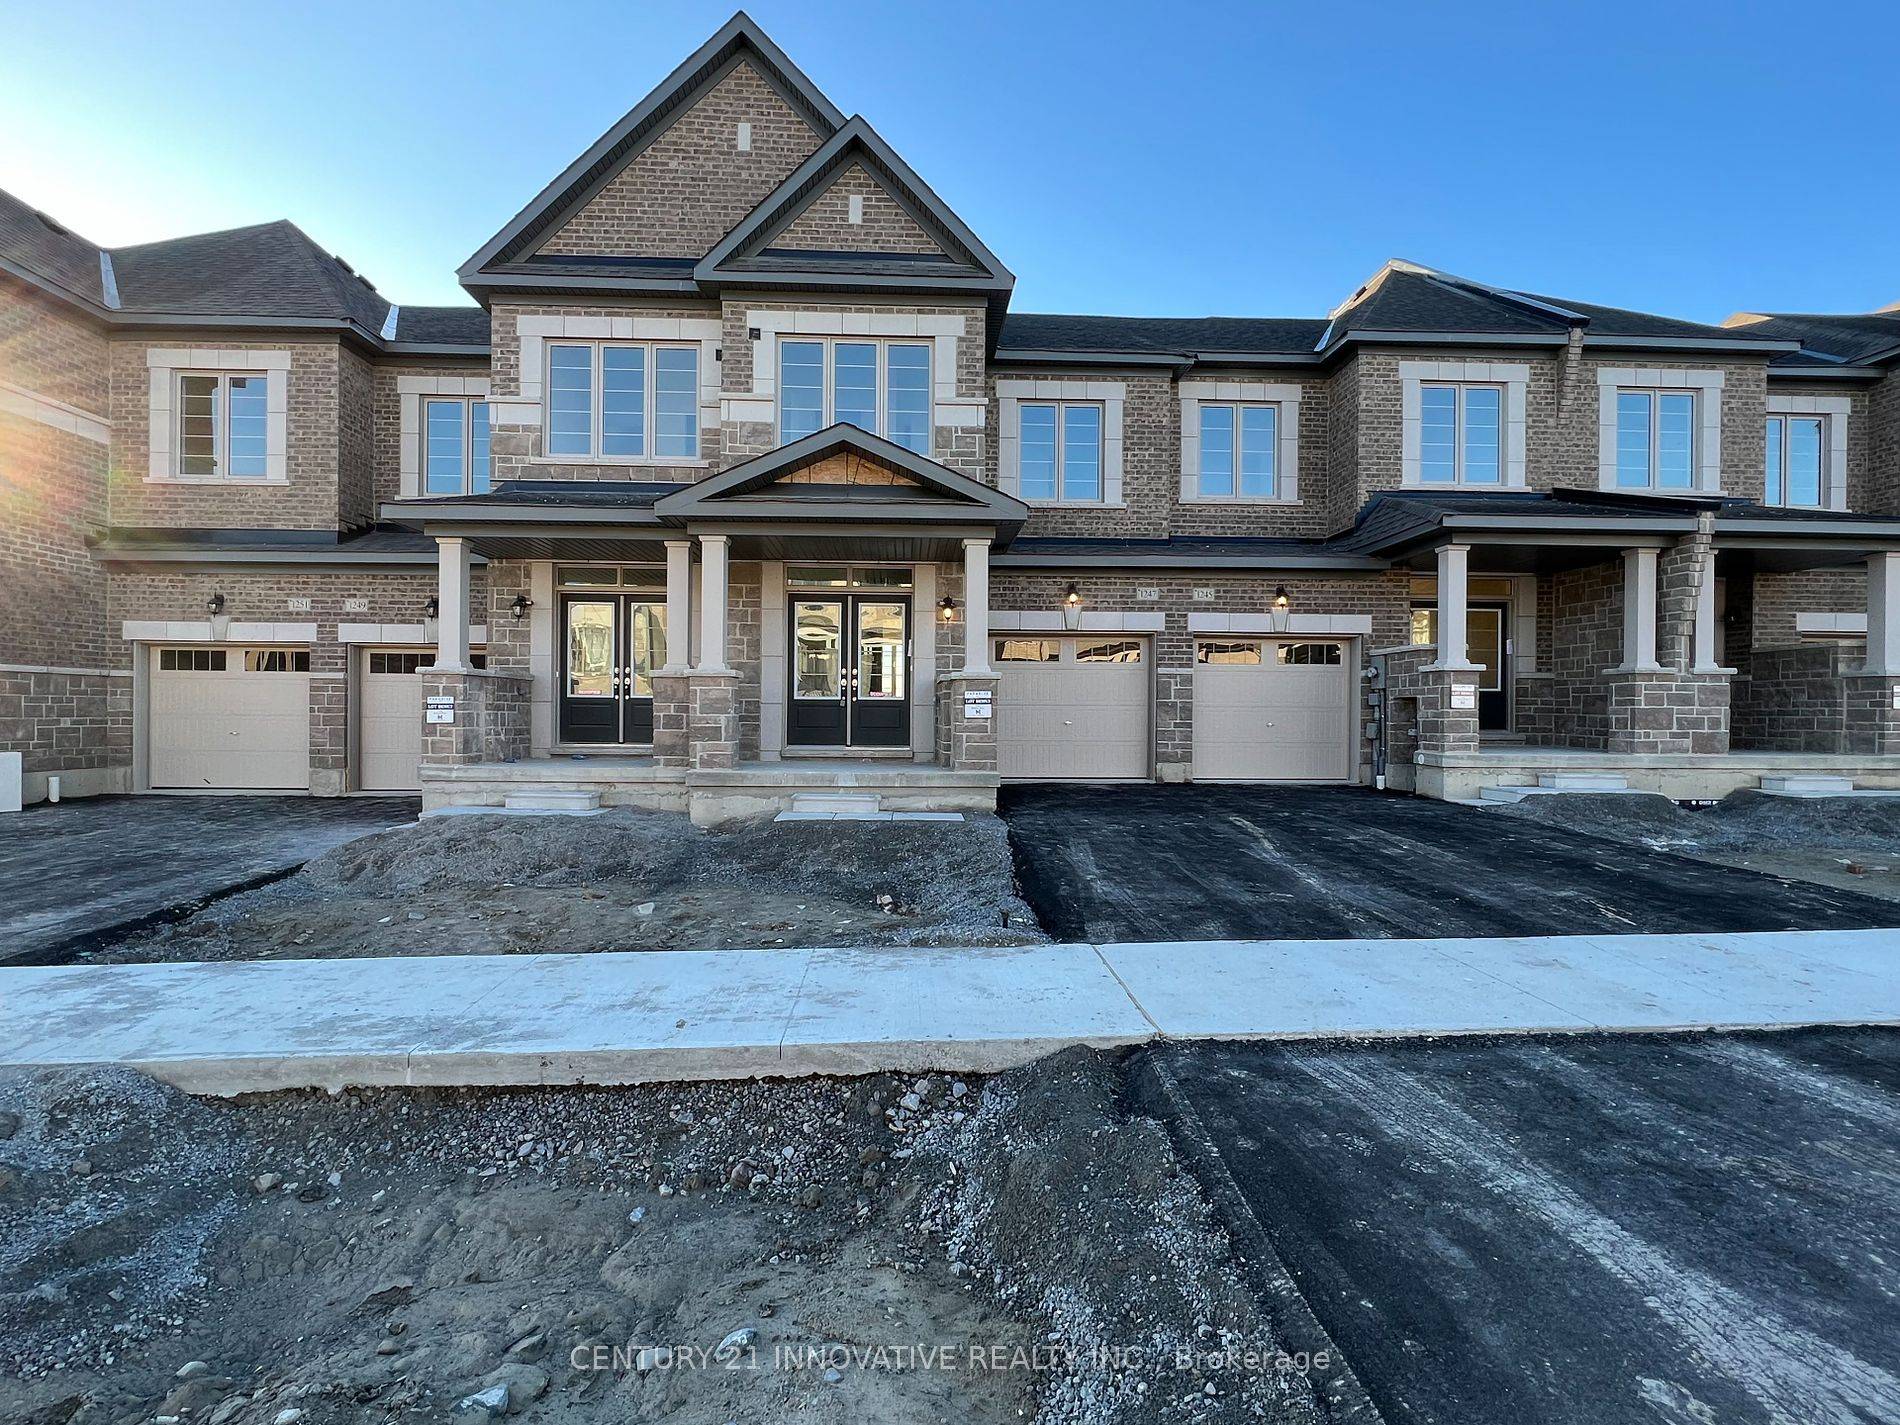 Brand new, open concept 4 bedroom freehold brick Town home in beautiful North Oshawa.